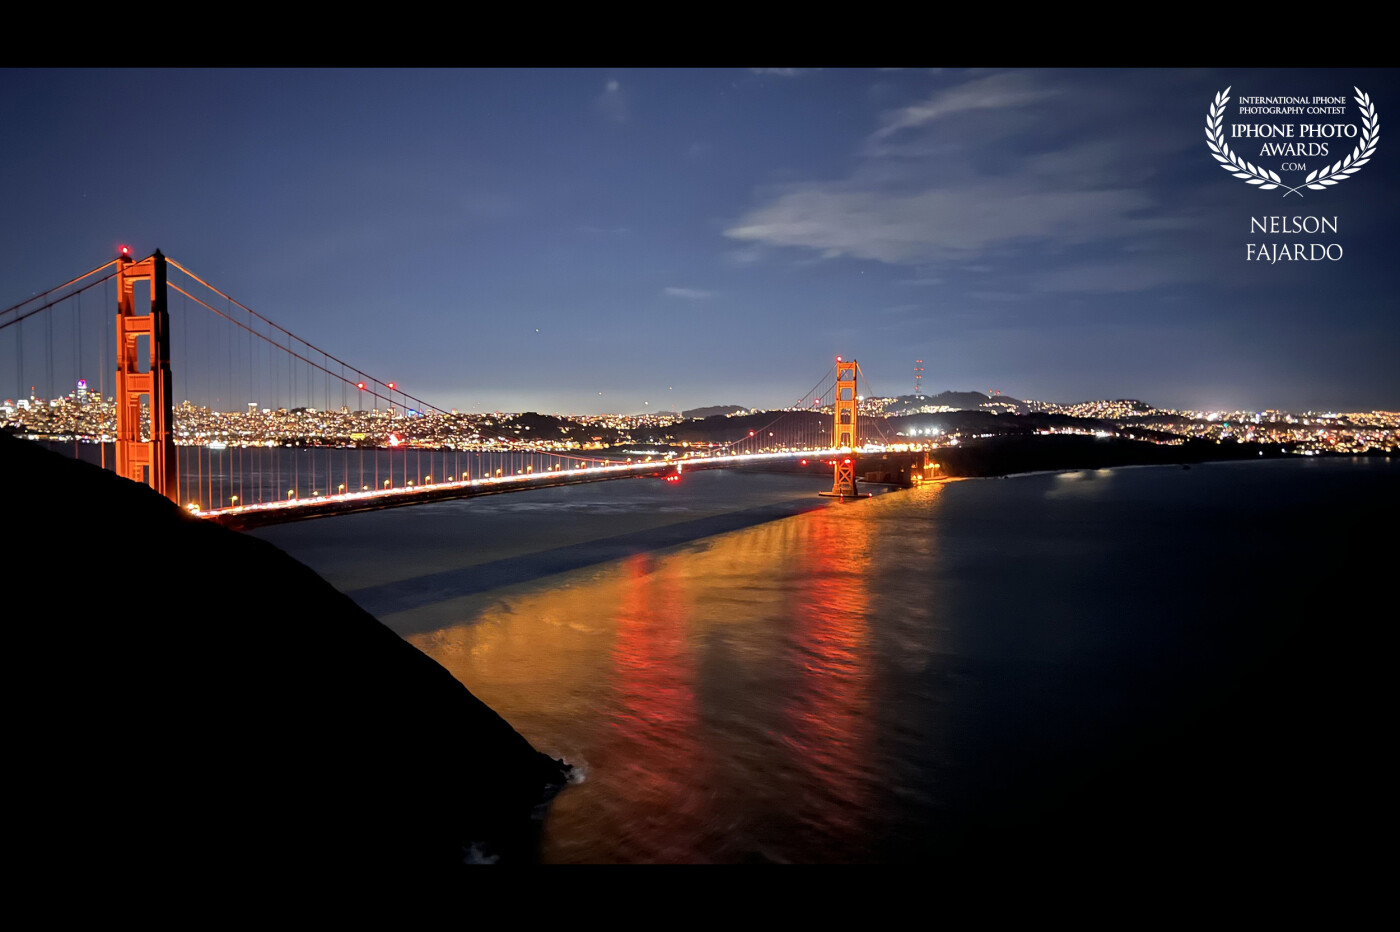 The Golden Gate at dusk, arrived late due to unexpected heavy traffic, nonetheless it’s still awesome, and loving the light reflection on the bay.